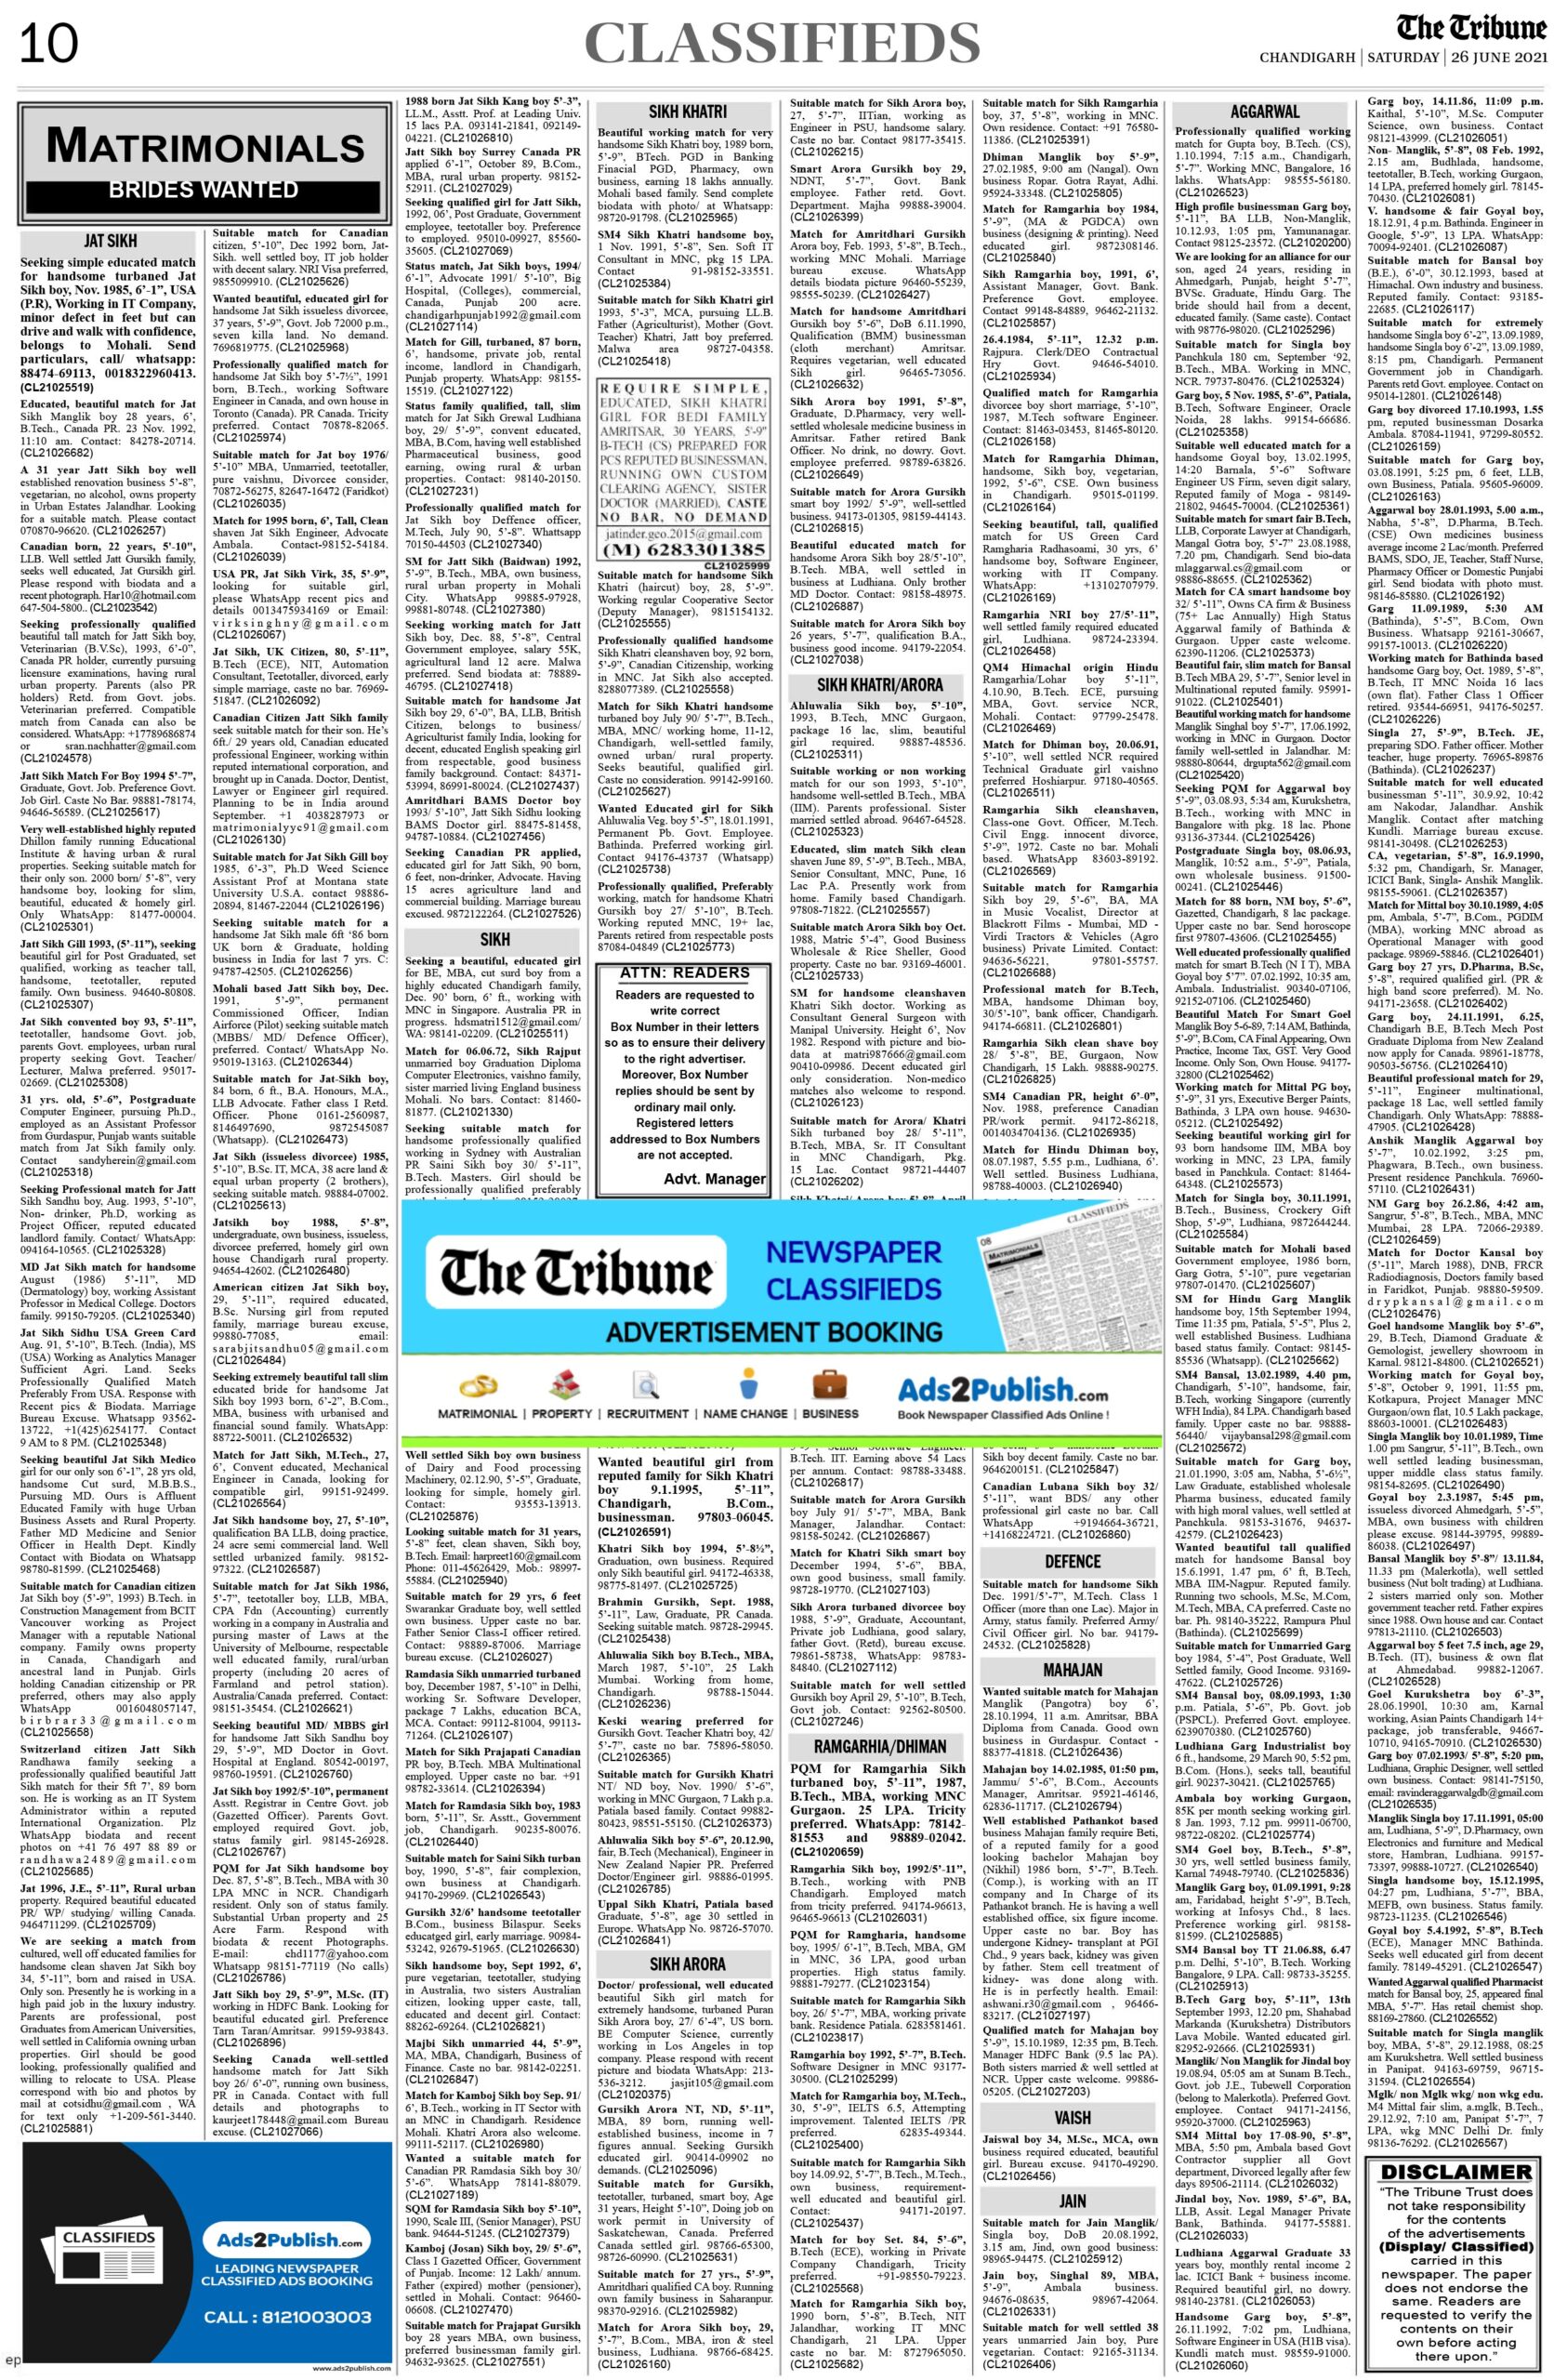 the-tribune-26-6-2021-matrimonial-wanted-bride-classified-paper